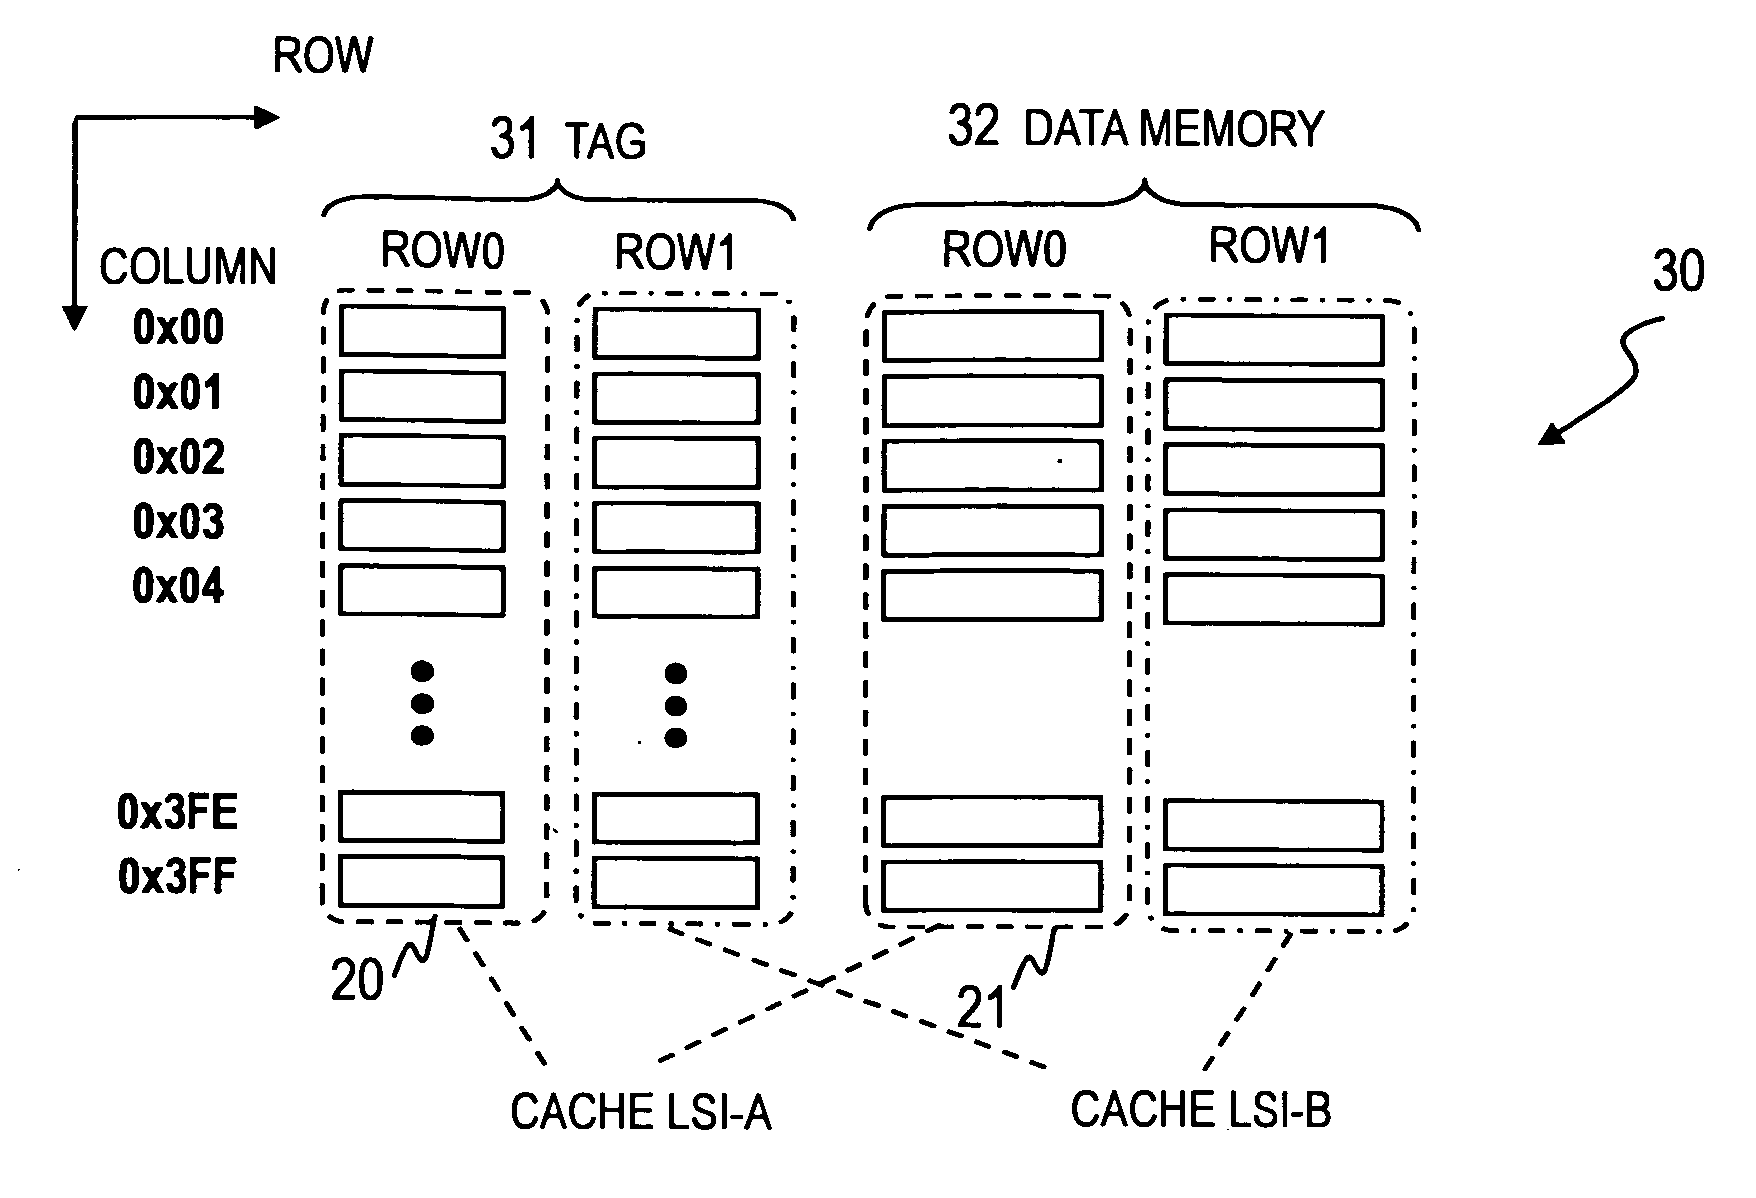 Processor having a cache memory which is comprised of a plurality of large scale integration